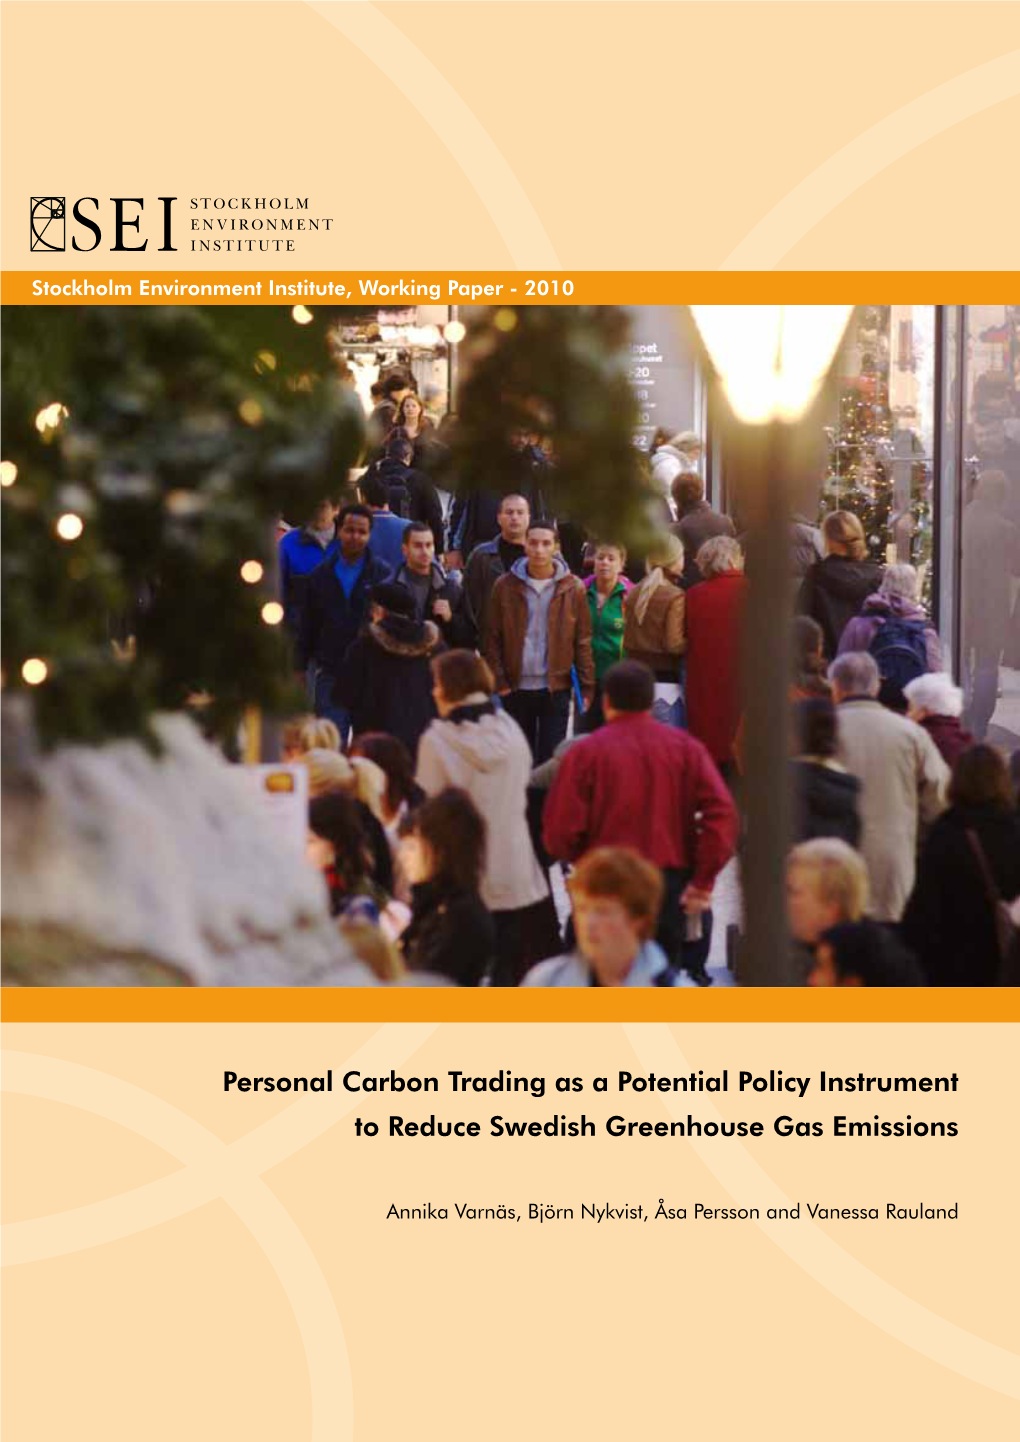 Personal Carbon Trading As a Potential Policy Instrument to Reduce Swedish Greenhouse Gas Emissions